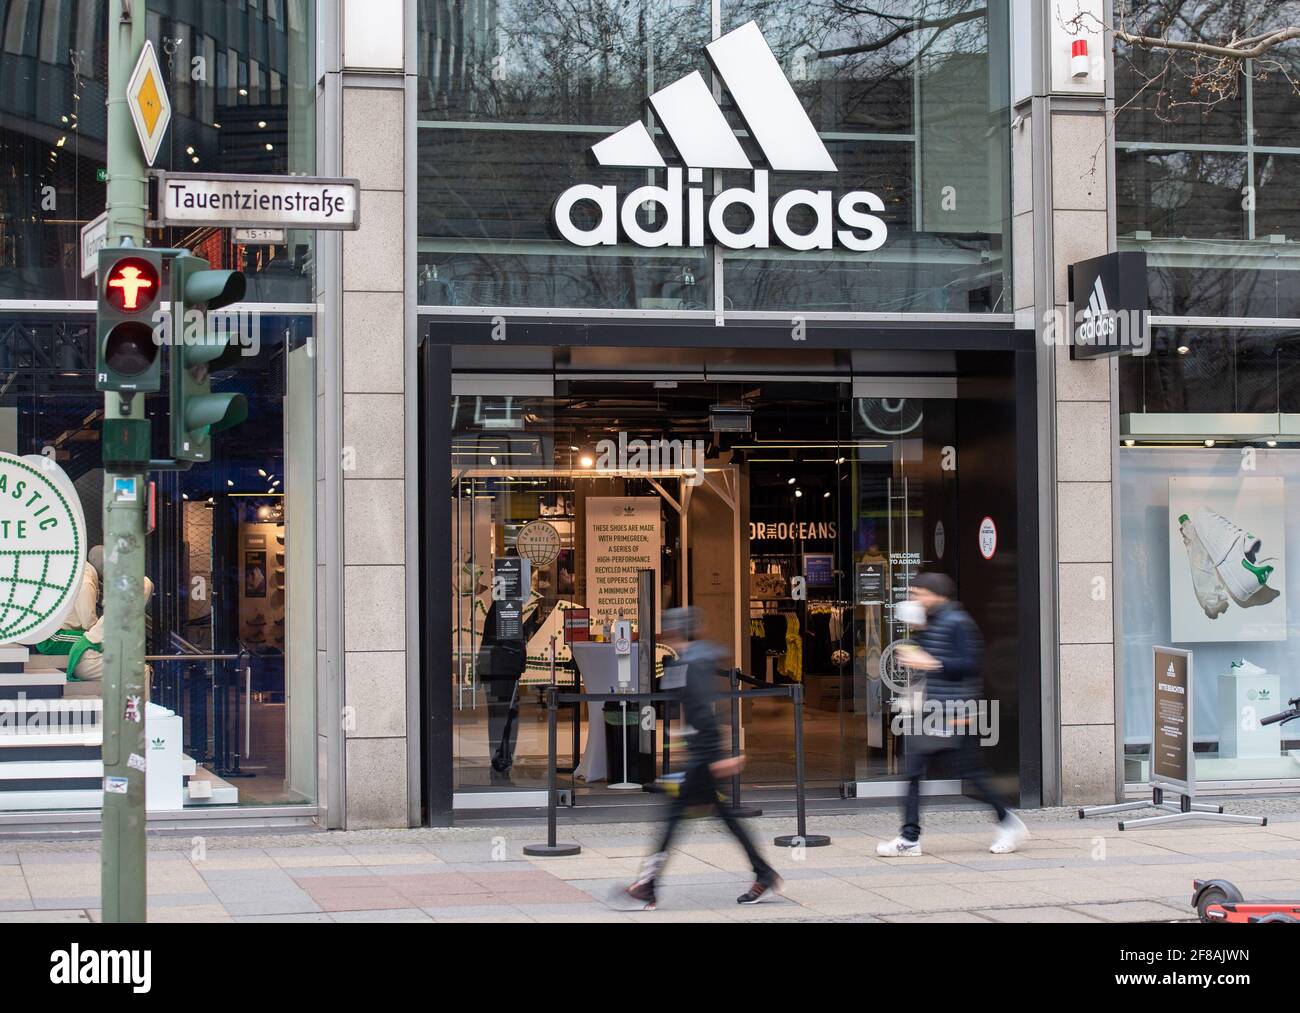 Adidas Berlin Store High Resolution Stock Photography and Images - Alamy